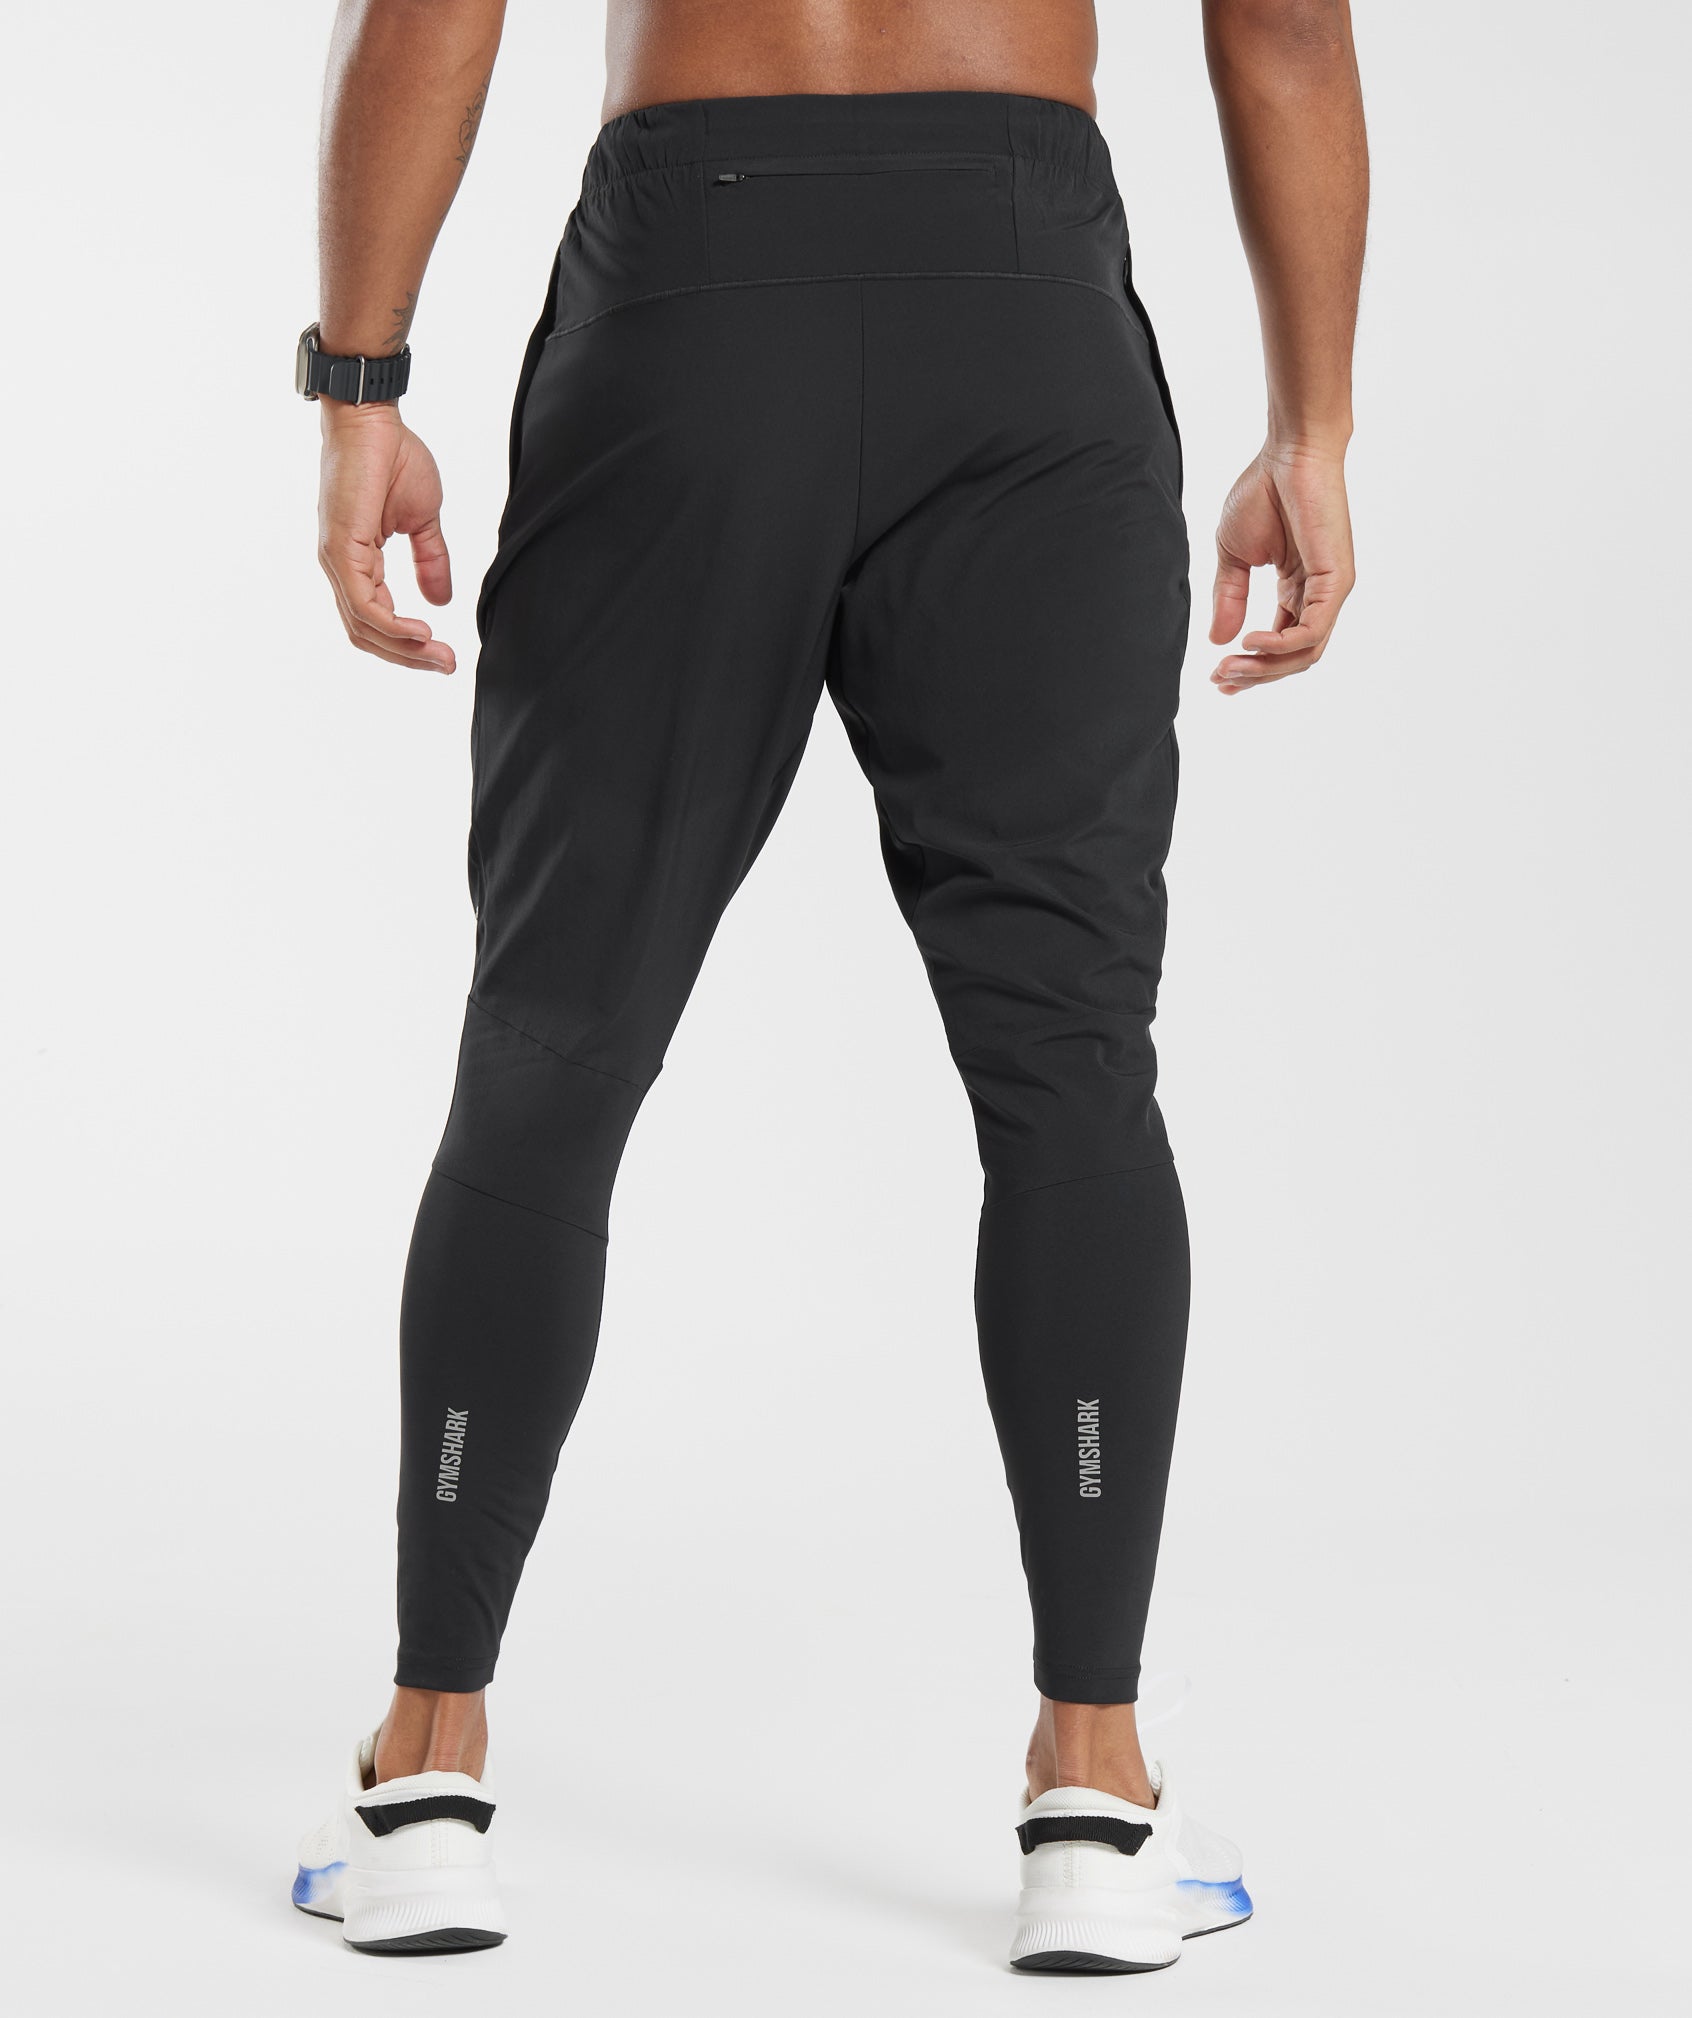 Speed Joggers in Black - view 2